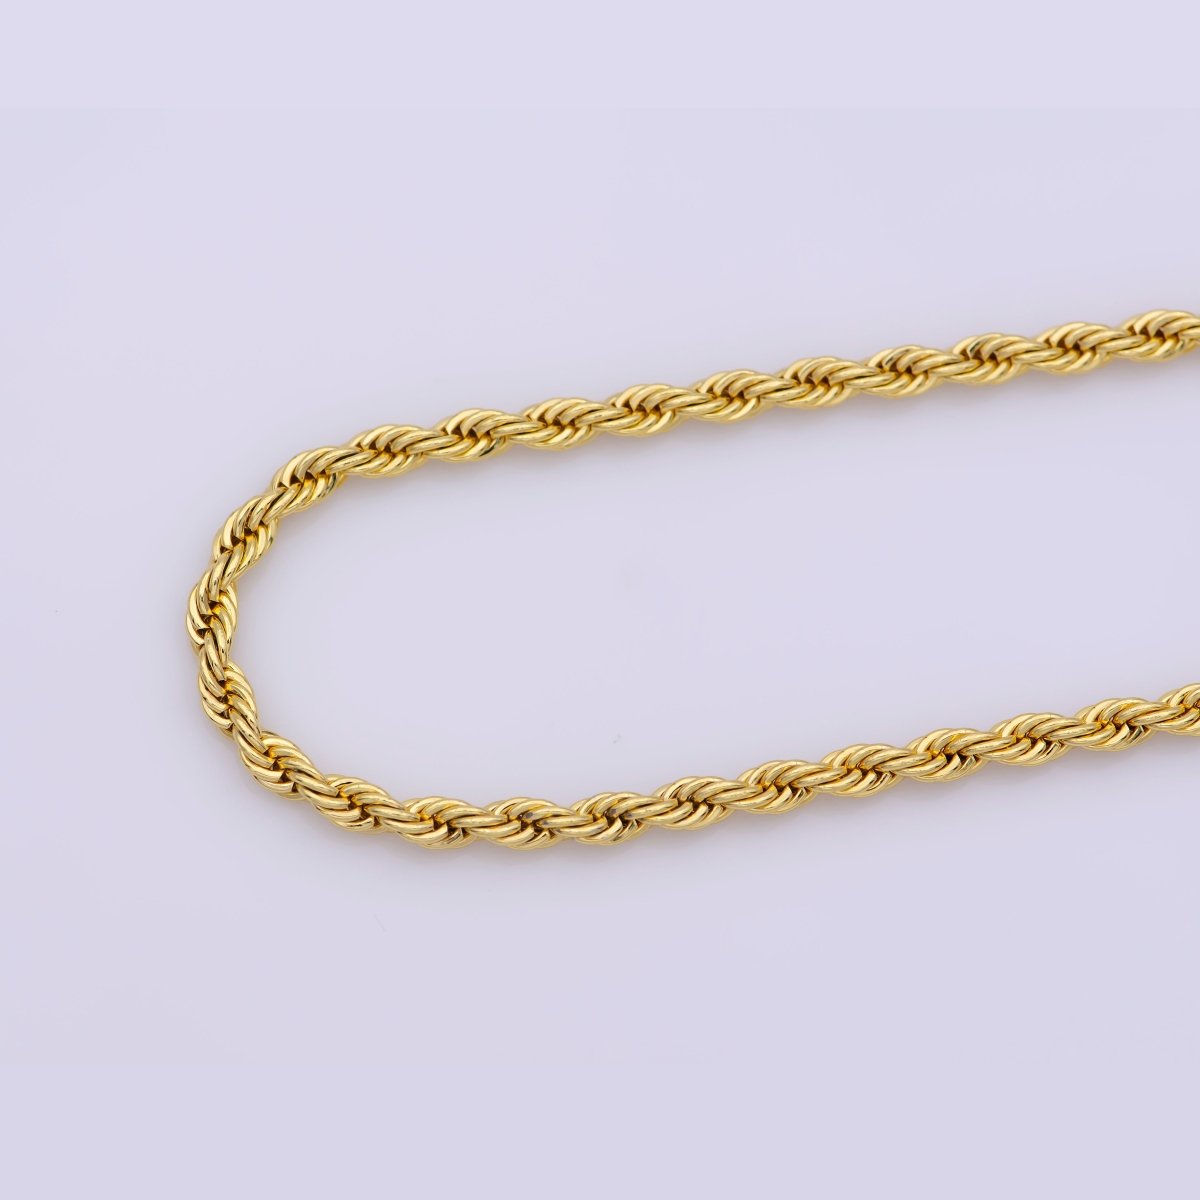 17.7" Rope Chain Necklace, 24K Gold Plated Finished Chain For Jewelry Making, 3mm Width Rope Necklace w/ Lobster Clasps | CN-599 Clearance Pricing - DLUXCA